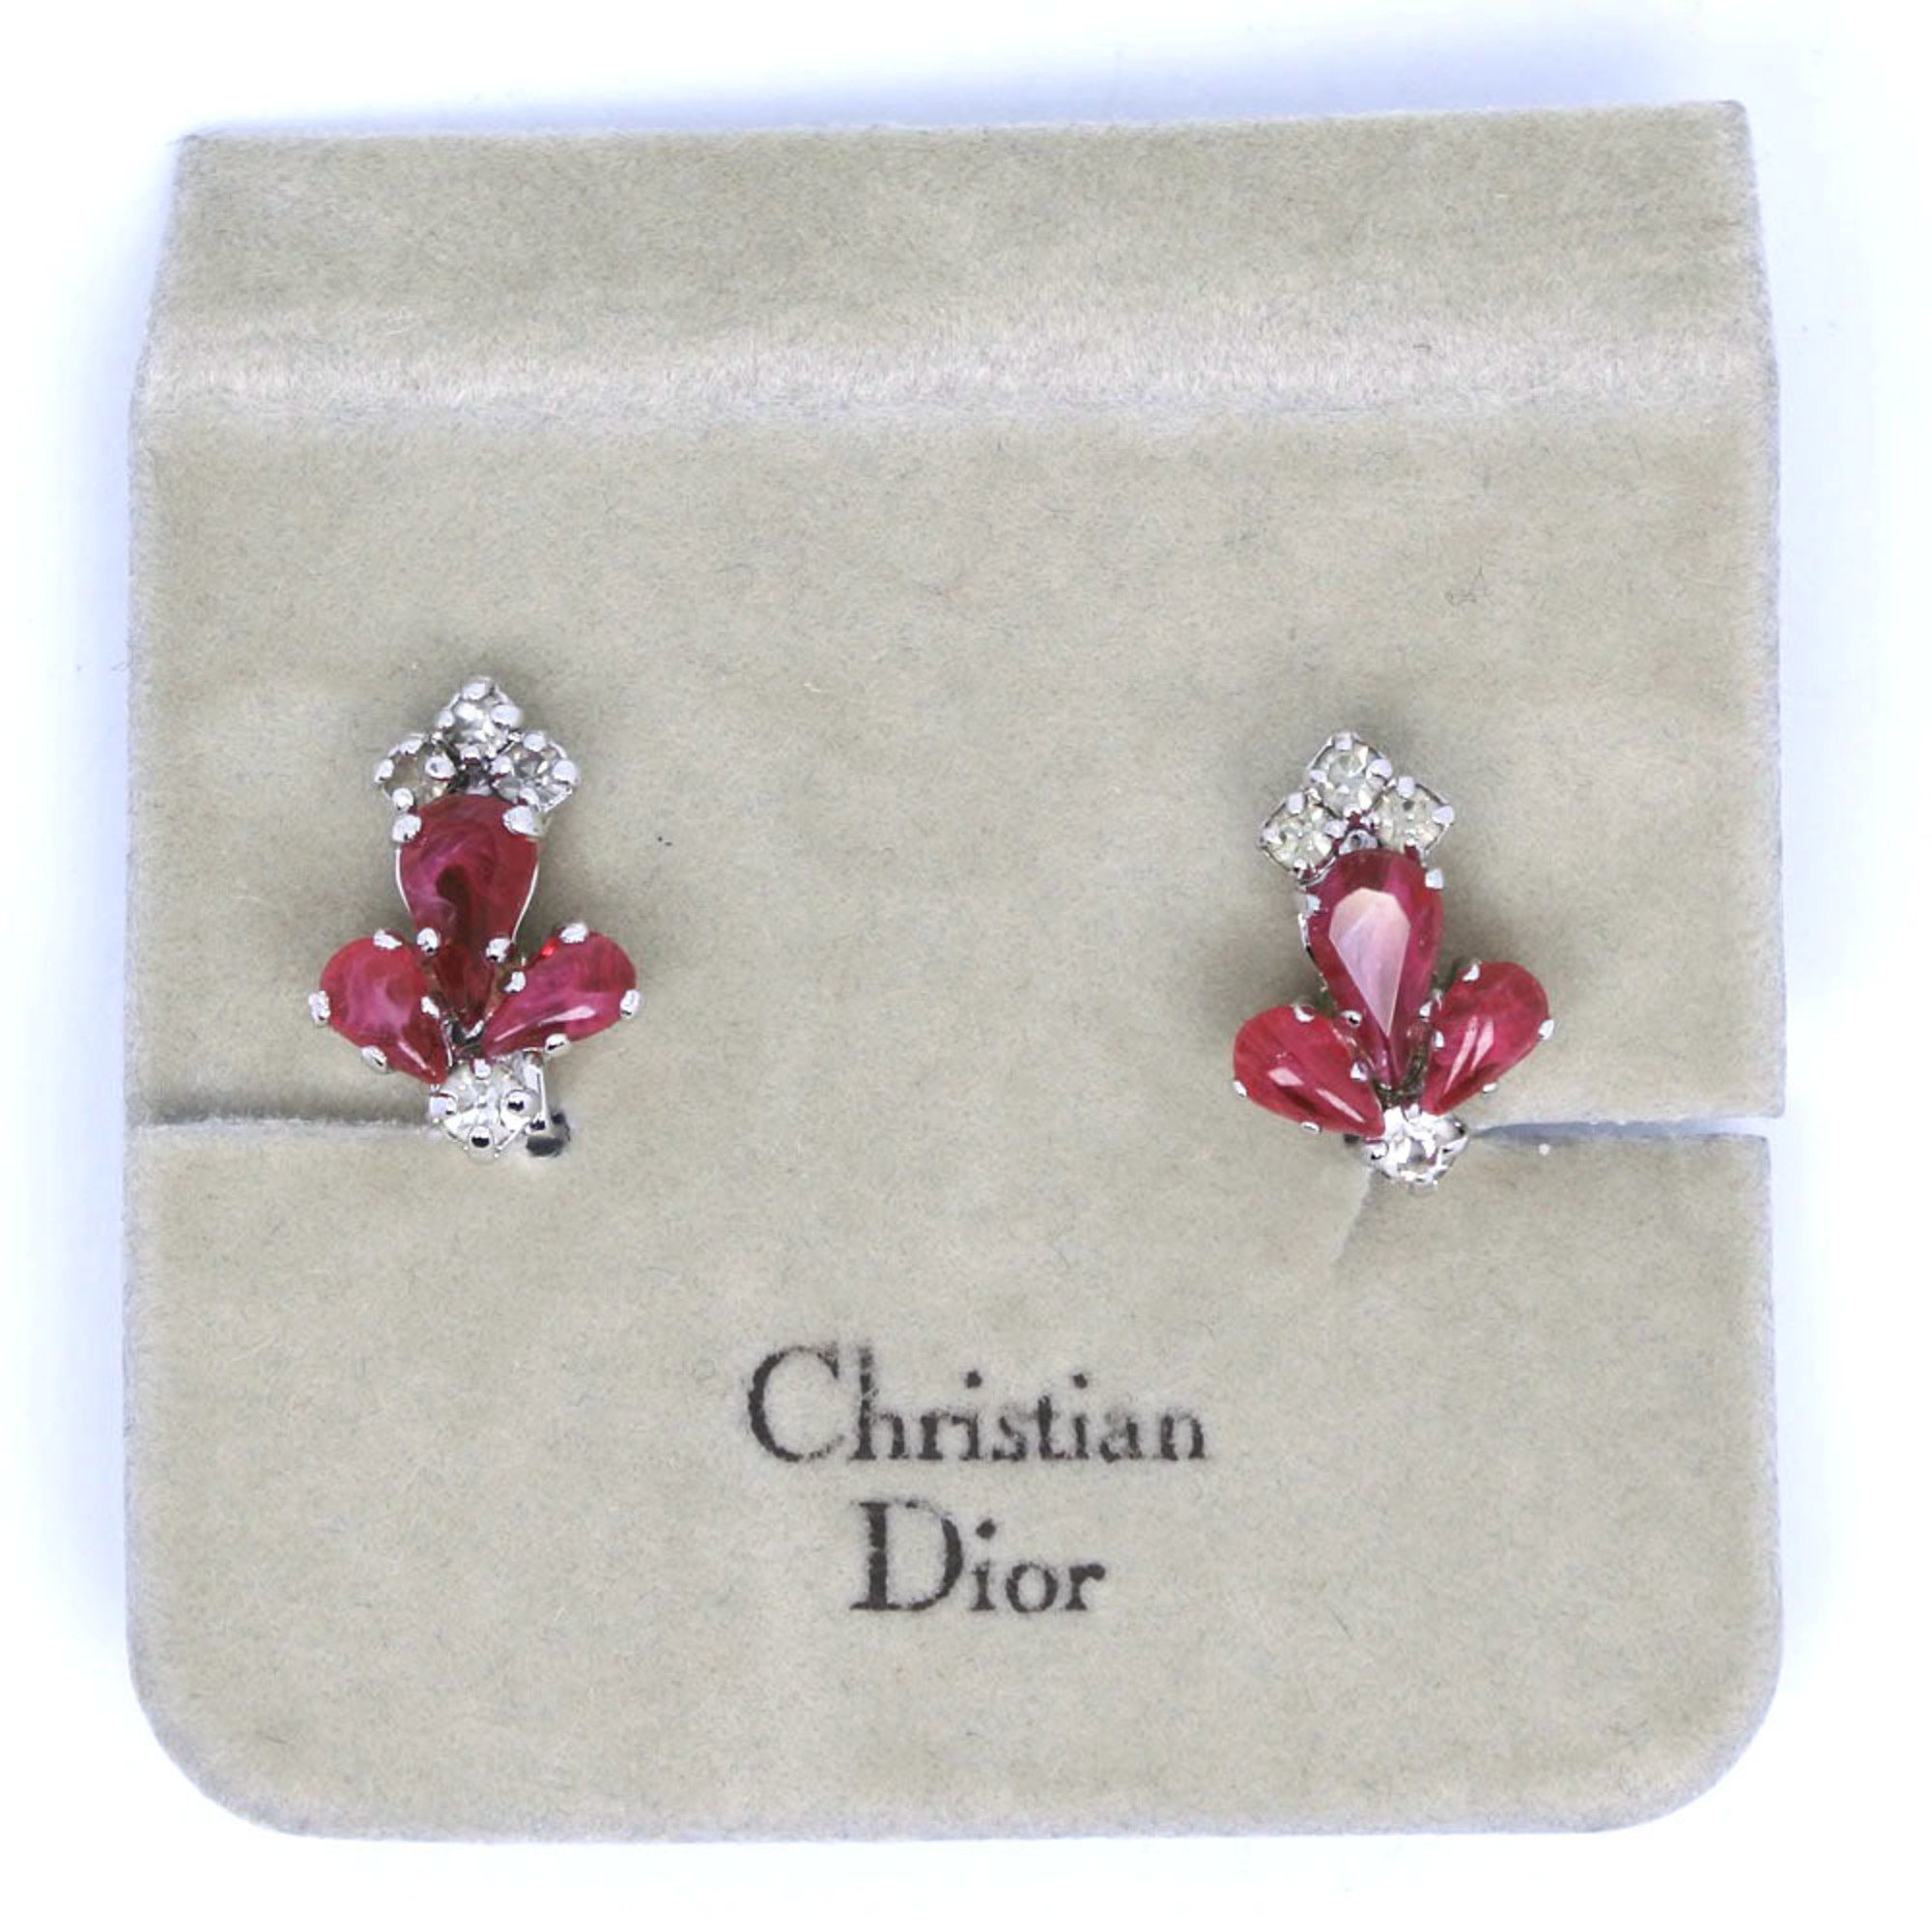 Christian Dior Flower Earrings x Rhinestones Made in Germany Silver Approx. 4.1g Flour Women's